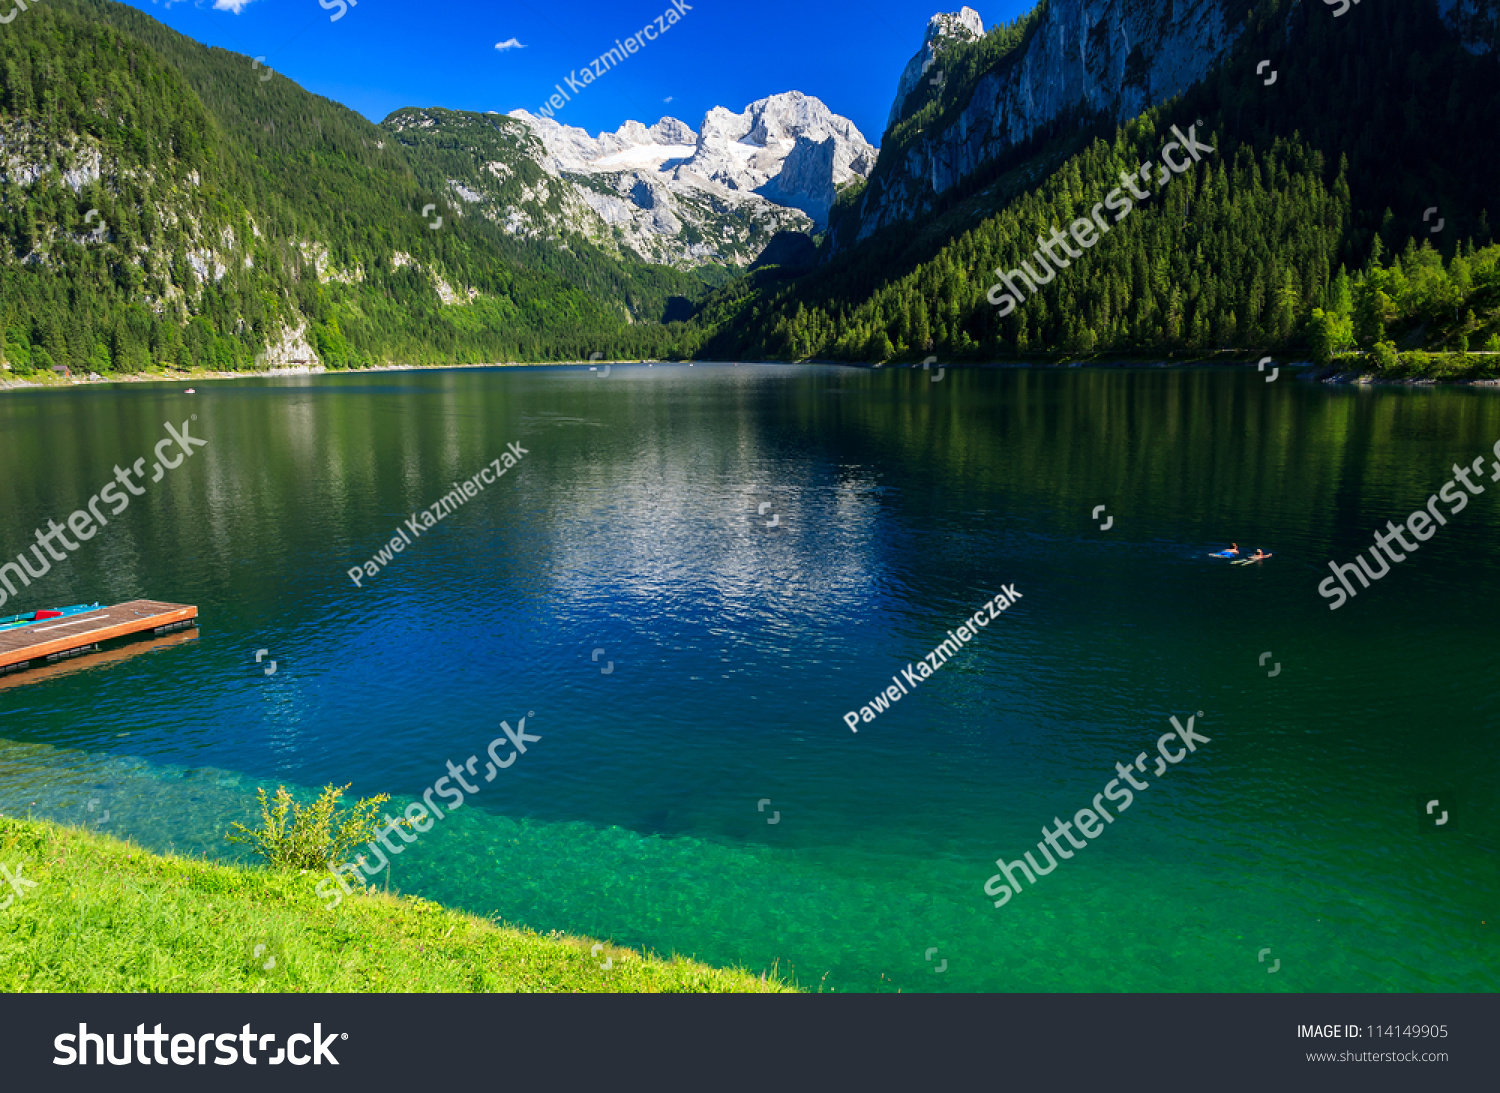 Two People Swimming In Alpine Lake With Crystal Clear Green Water And